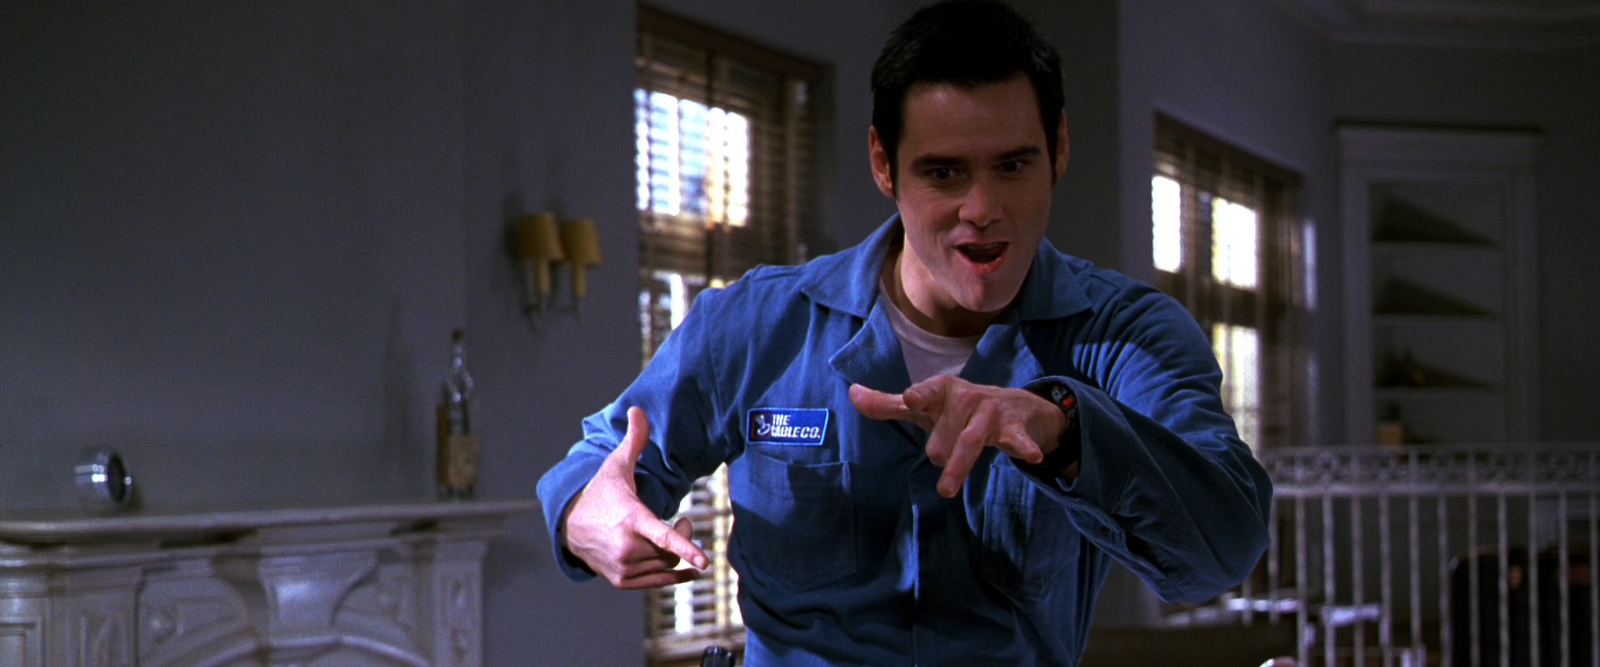 Cable Guy Jim Carrey 1996 Tormented Came Saw Sony.